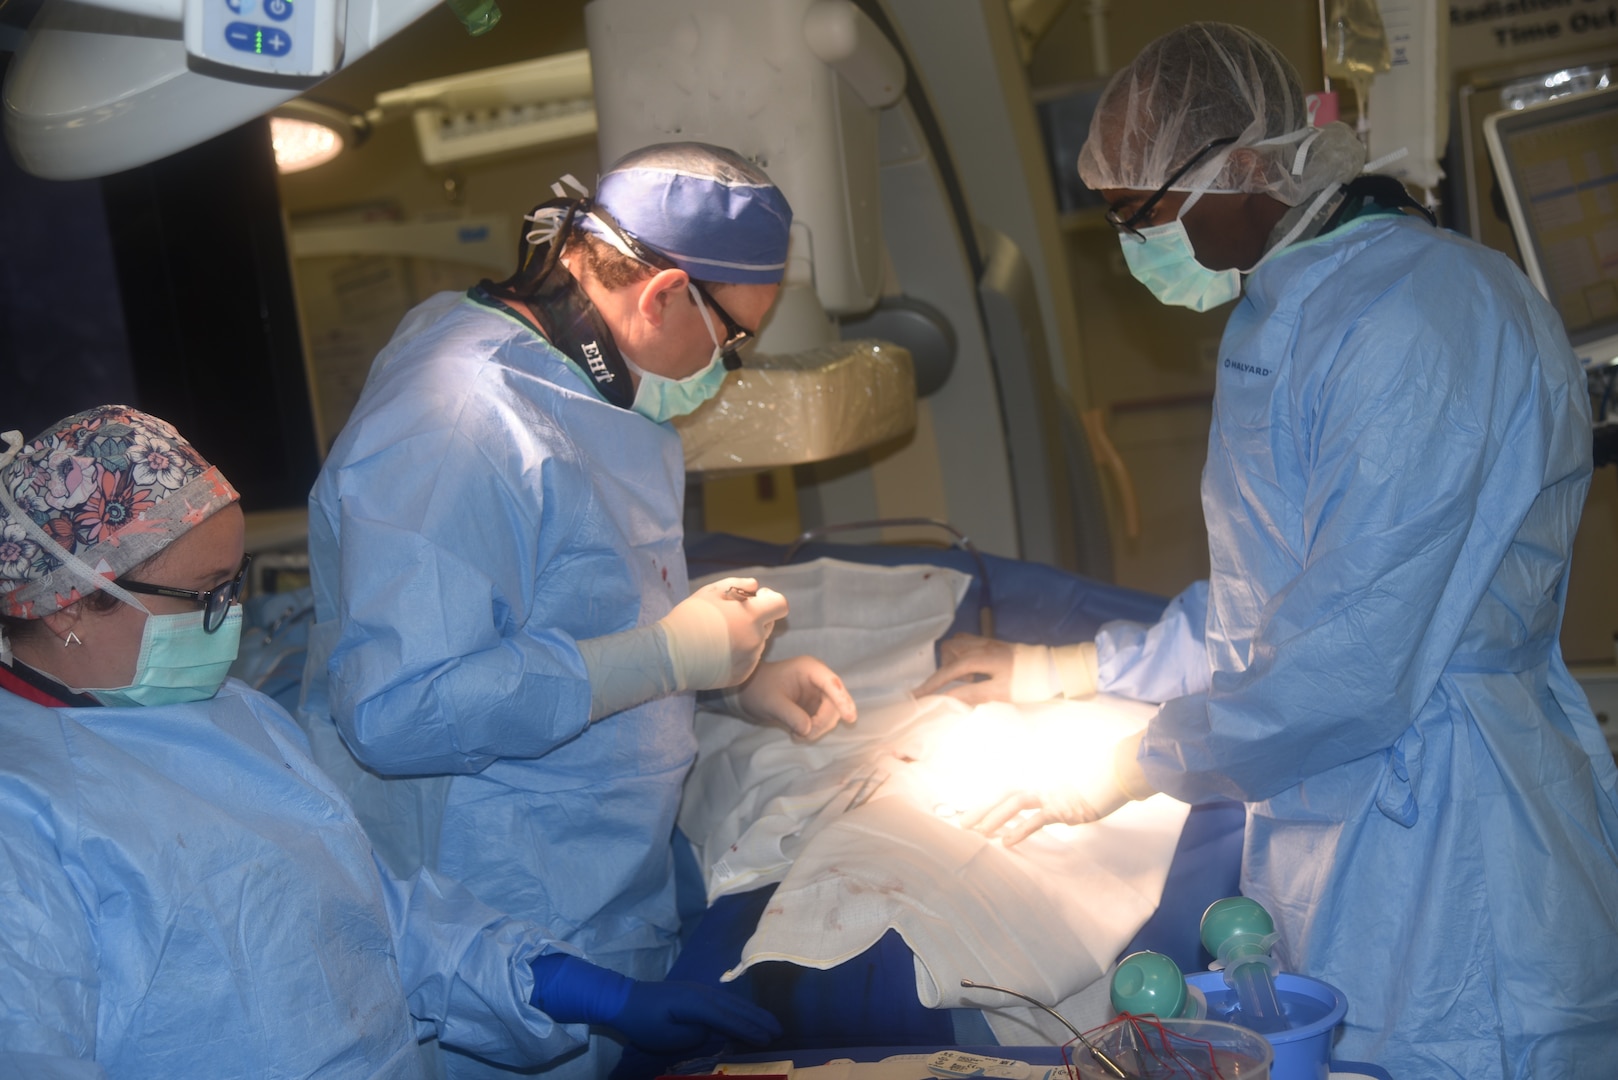 U.S. Navy Cmdr. (Dr.) Eric H. Twerdahl, a surgeon in the Division of Vascular Surgery and the current surgical quality officer at Walter Reed National Military Medical Center, perform surgery in one of WRNMMC's hybrid operating rooms on July 14.